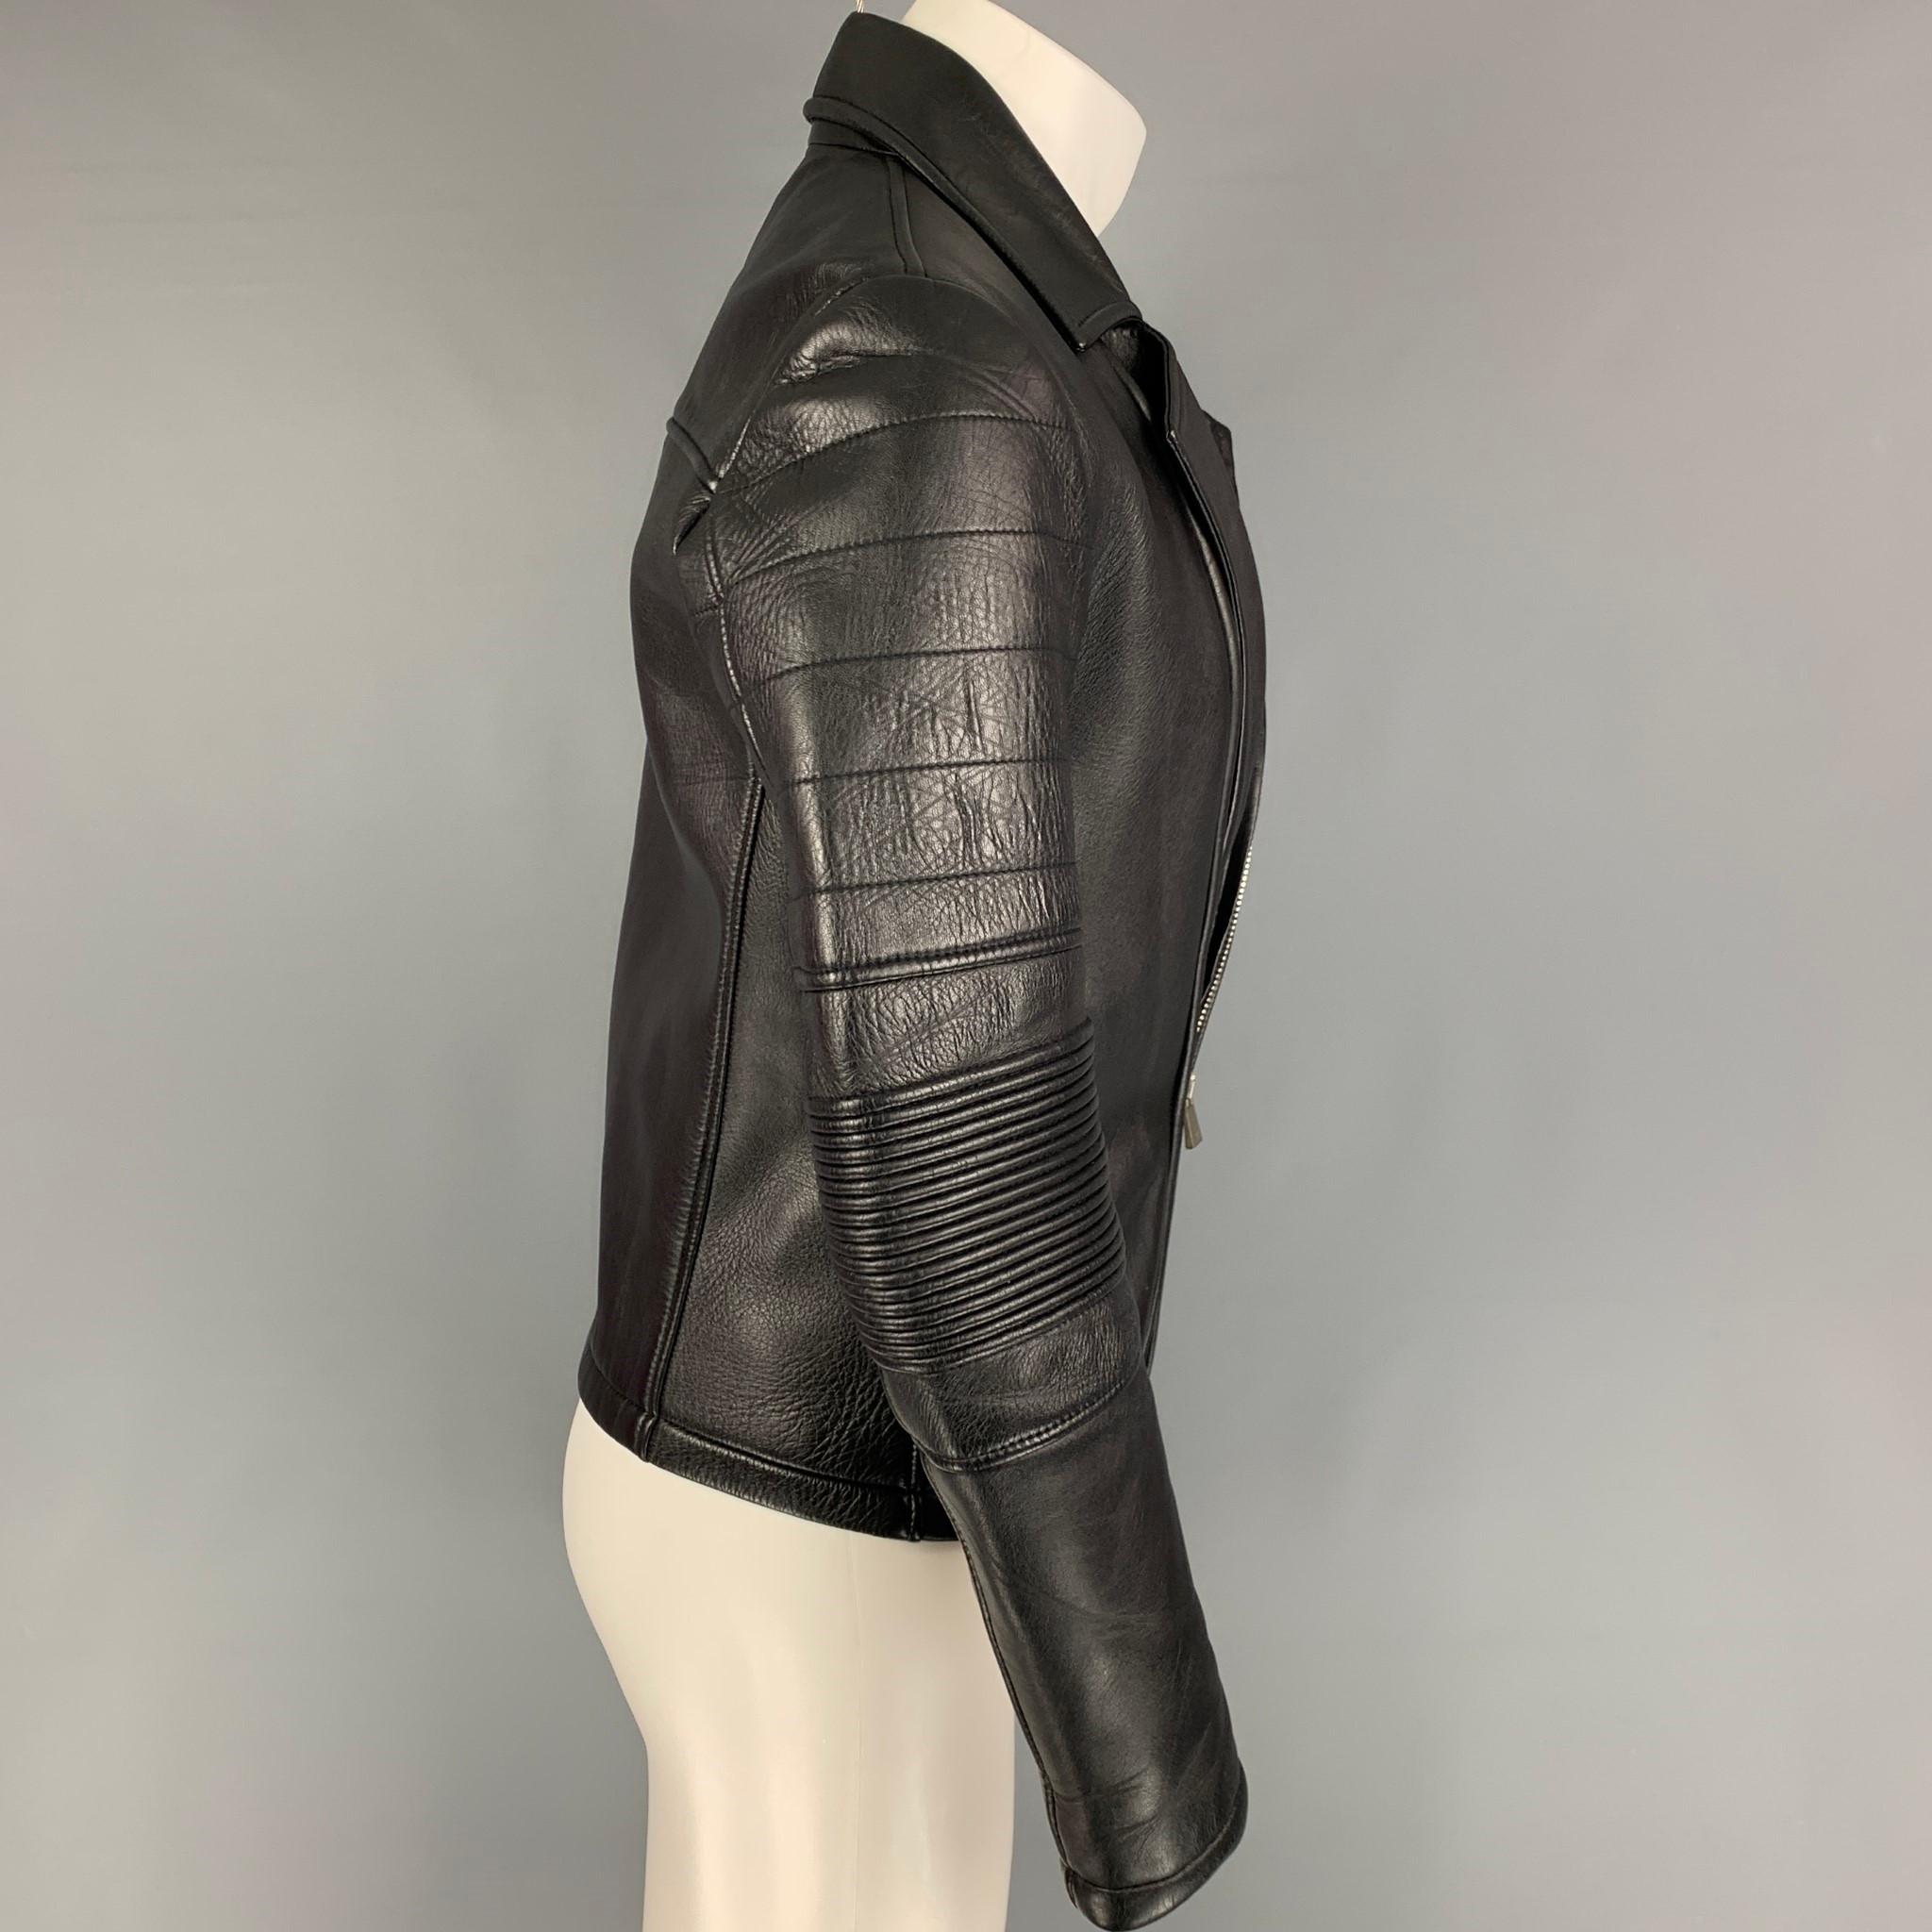 EMPORIO ARMANI jacket comes in a black leather featuring a biker style, ribbed arms, slit pockets, and a zip up closure. Made in Romania.

Very Good Pre-Owned Condition. Light mark at pocket. As-Is.
Marked: 46

Measurements:

Shoulder: 17.5